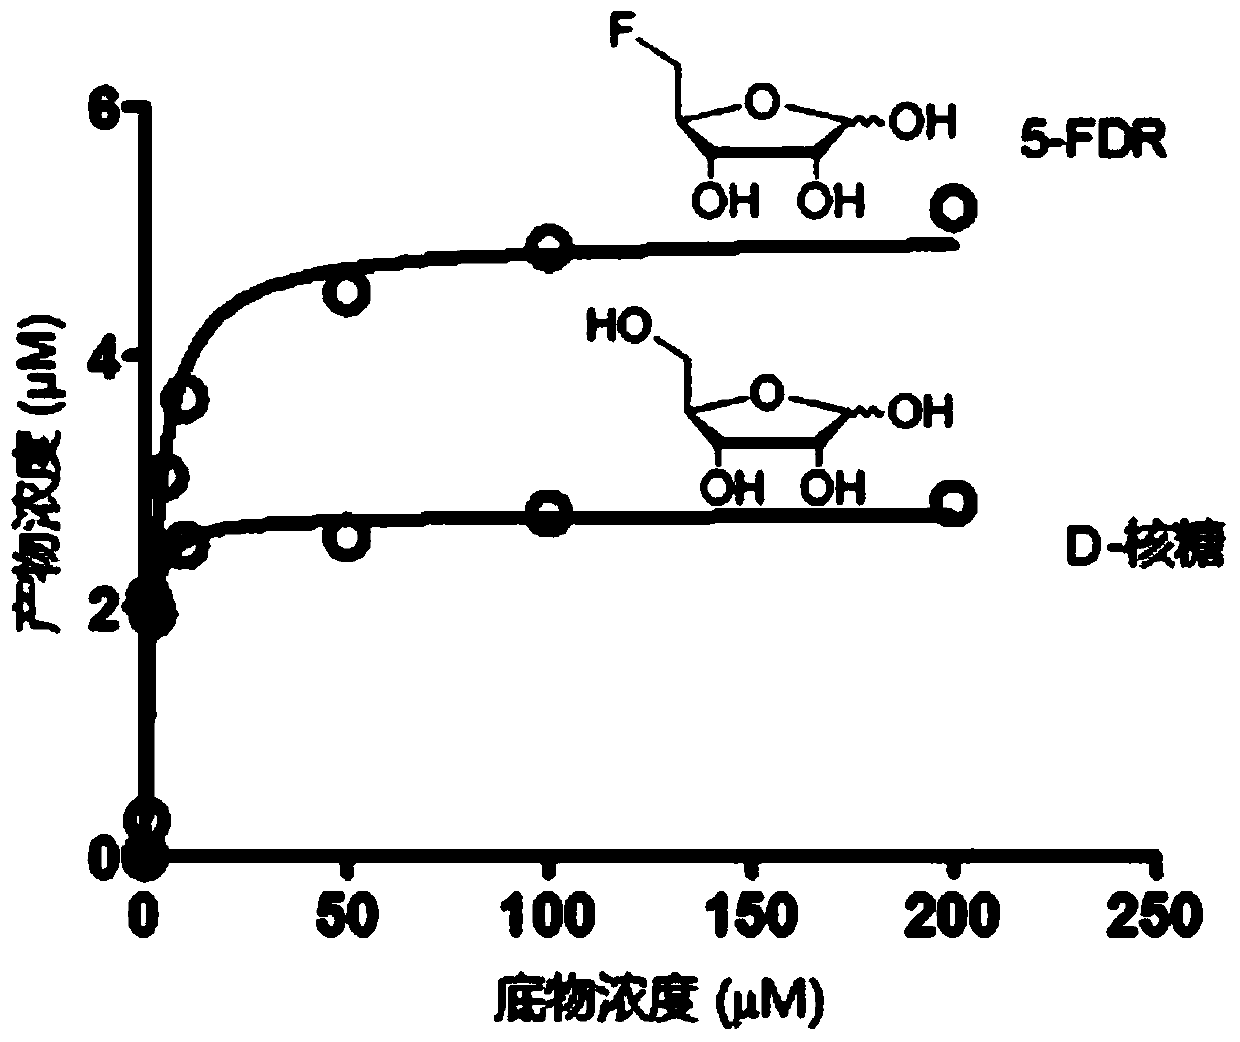 Short-chain dehydrogenase capable of hydrolyzing ribose and variety of fluorinated ribose